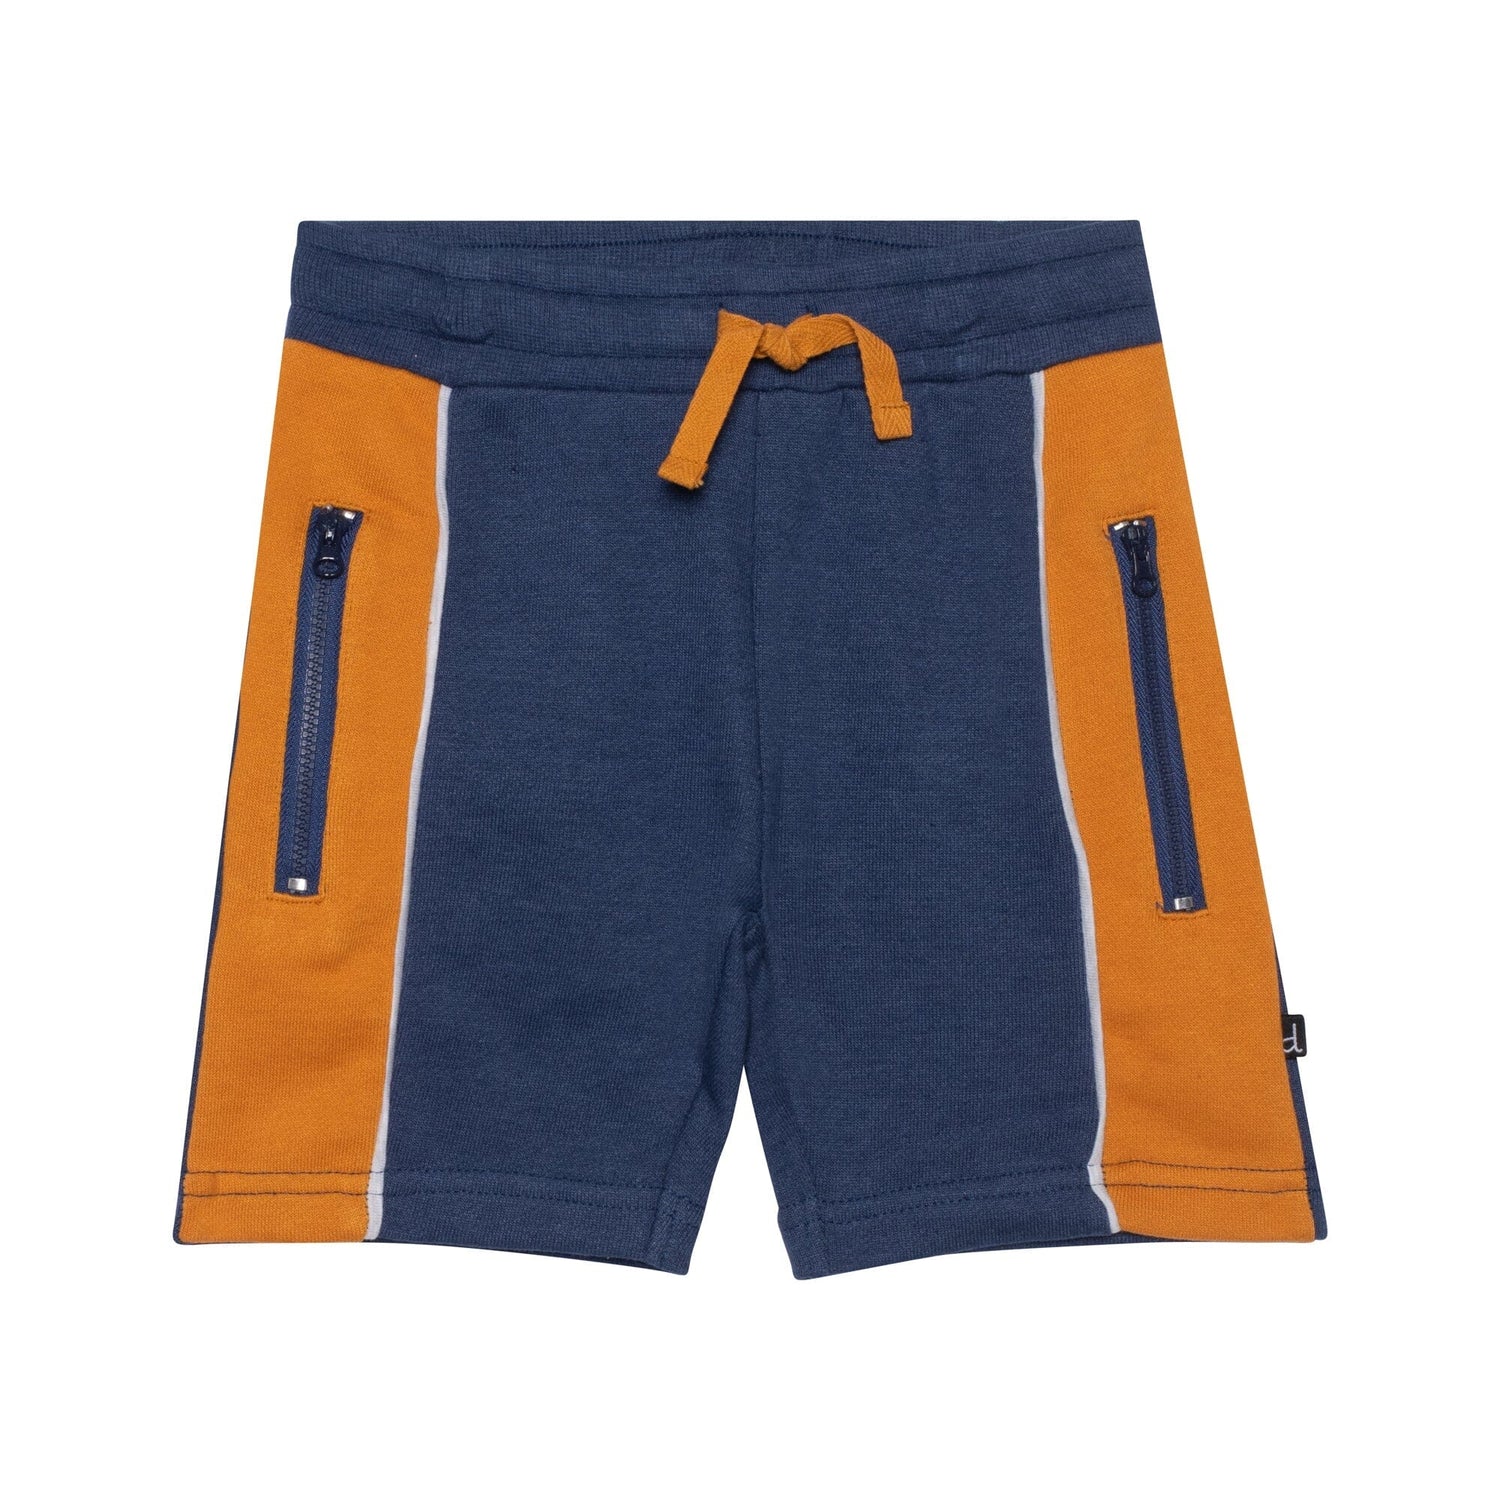 French Terry Short Navy Blue & Golden Yellow - E30S25_450